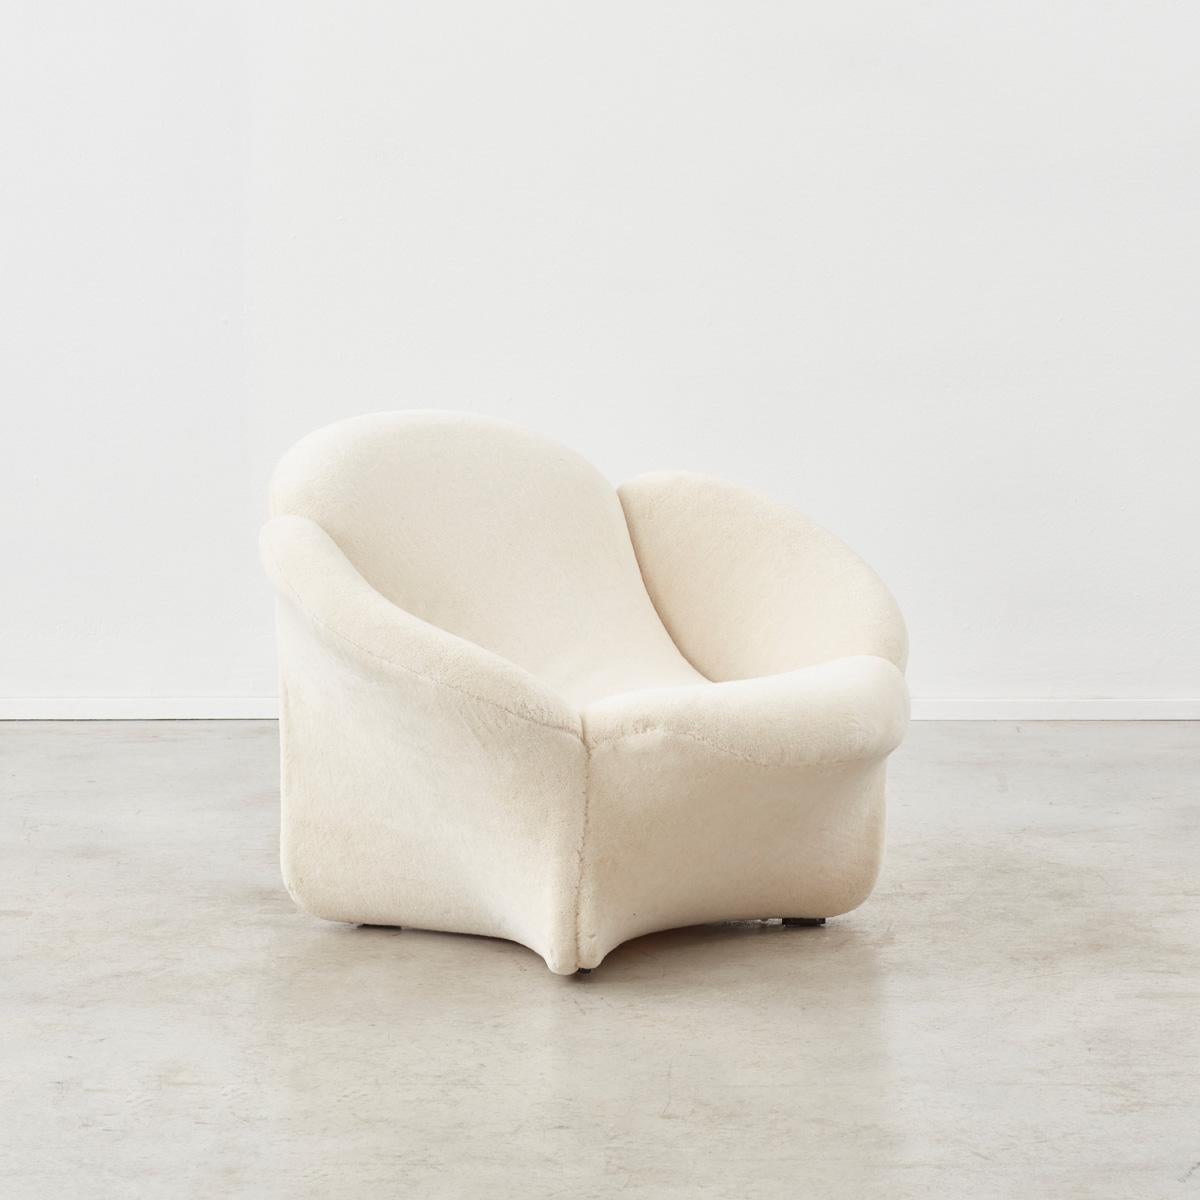 This armchair was designed by the French-born designer Pierre Paulin for Artifort. With the signature organic curves that features in many of his pieces. In the 1950s, Artifort’s head of design Kho Liang Le recruited Pierre Paulin – his designs are